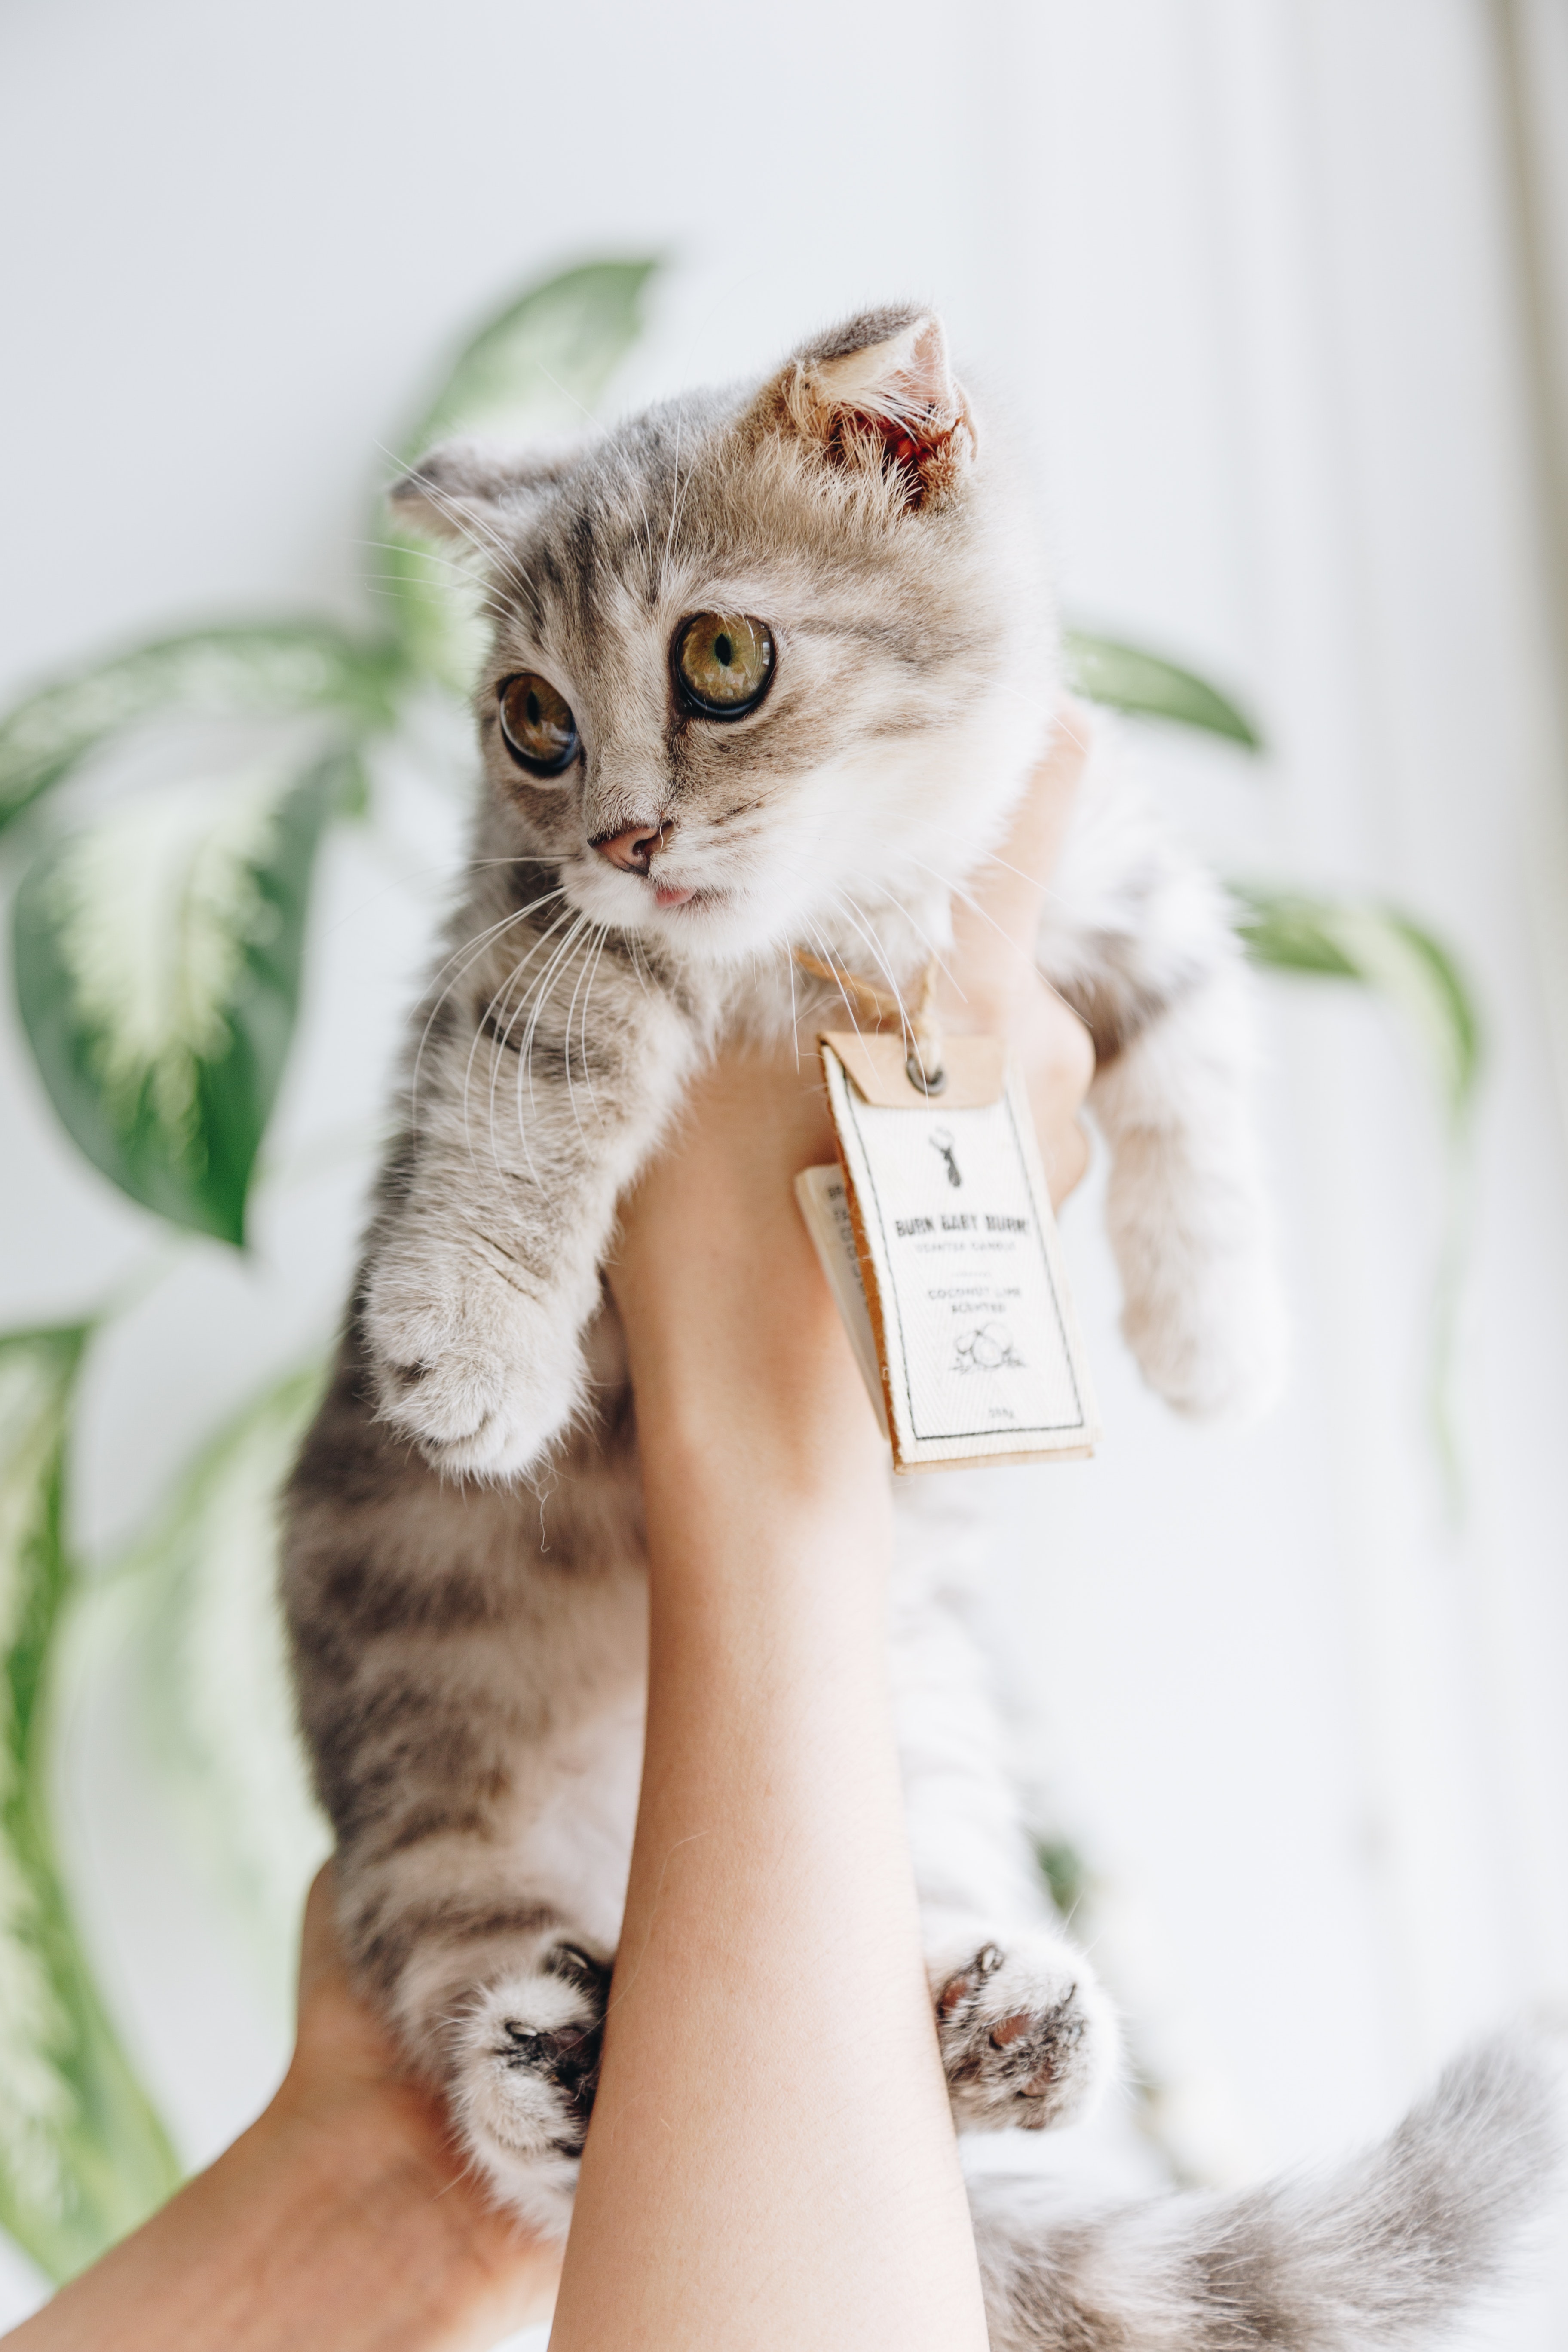 A person holding a cat wearing a tag